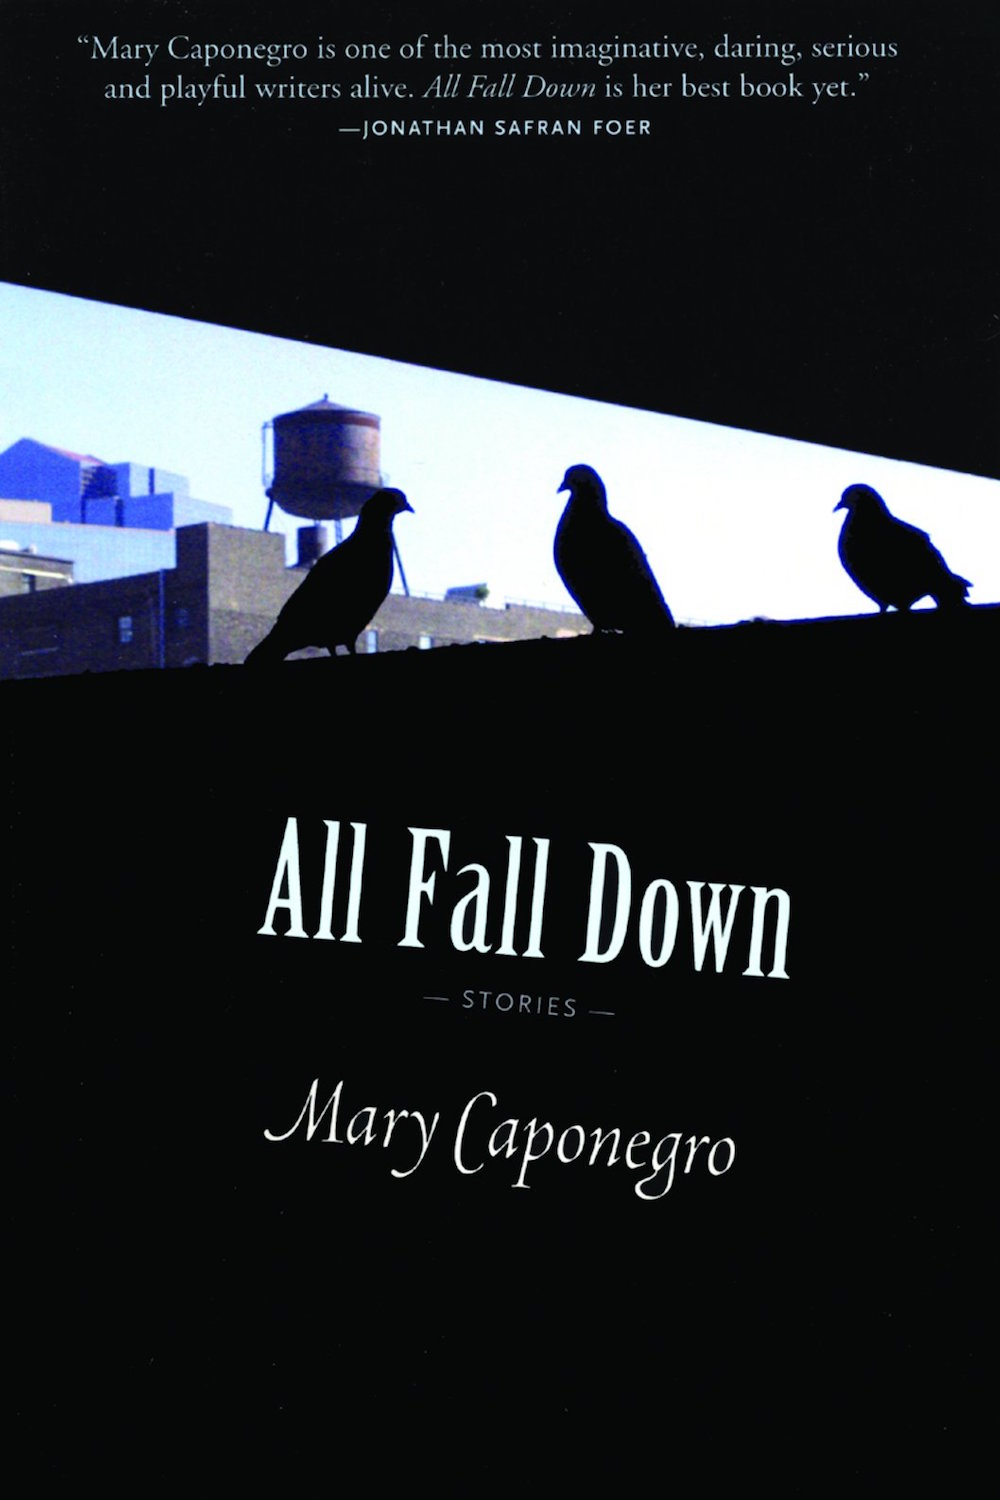 All Fall Down, stories by Mary Caponegro